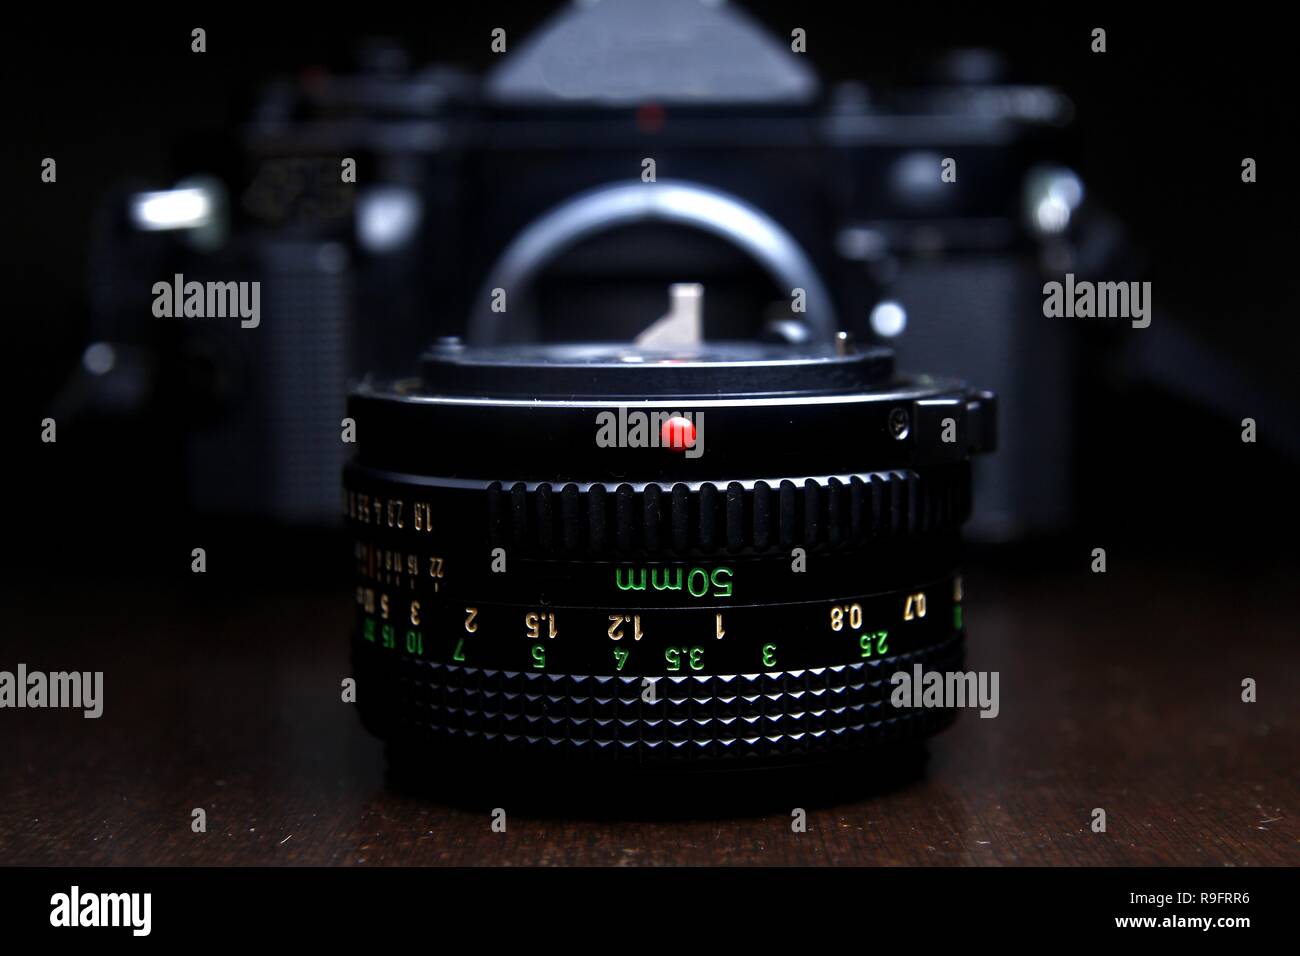 Focus ring camera Cut Out Stock Images & Pictures - Page 2 - Alamy